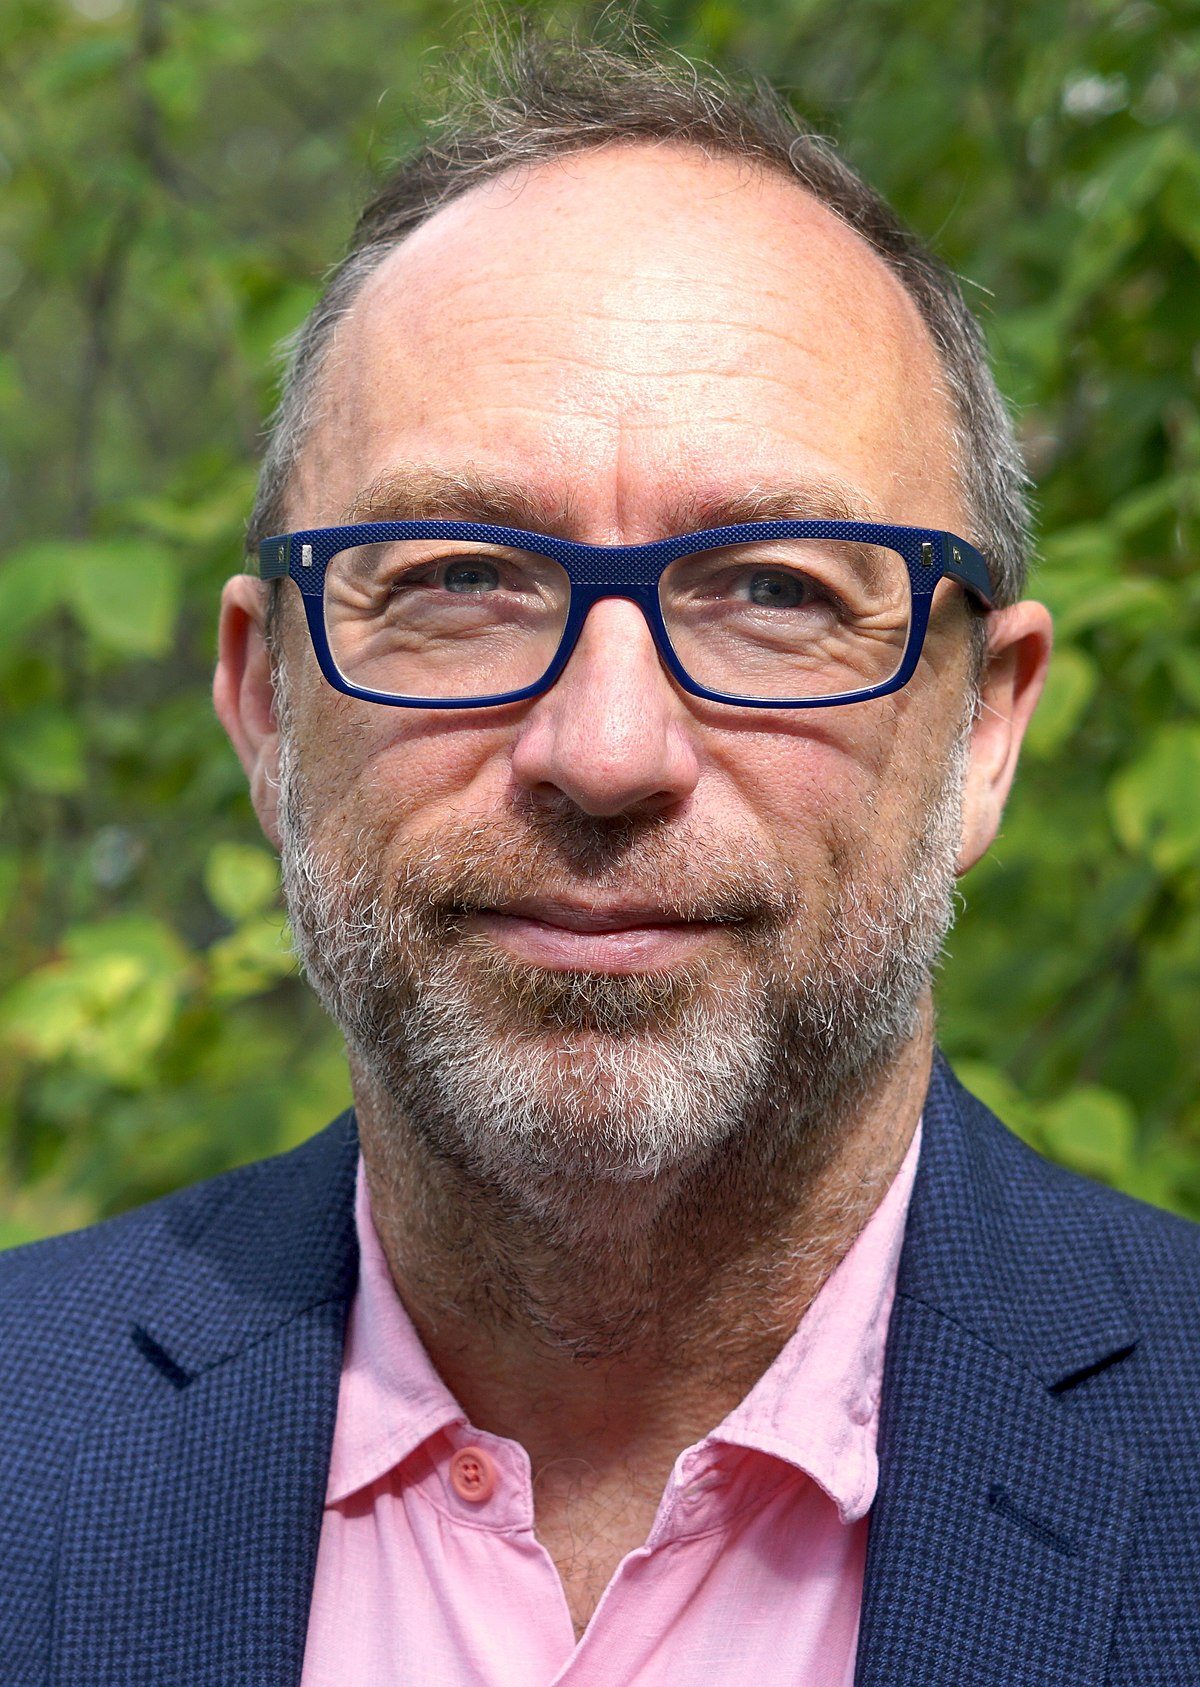 Jimmy wales, the co-founder of Wikipedia